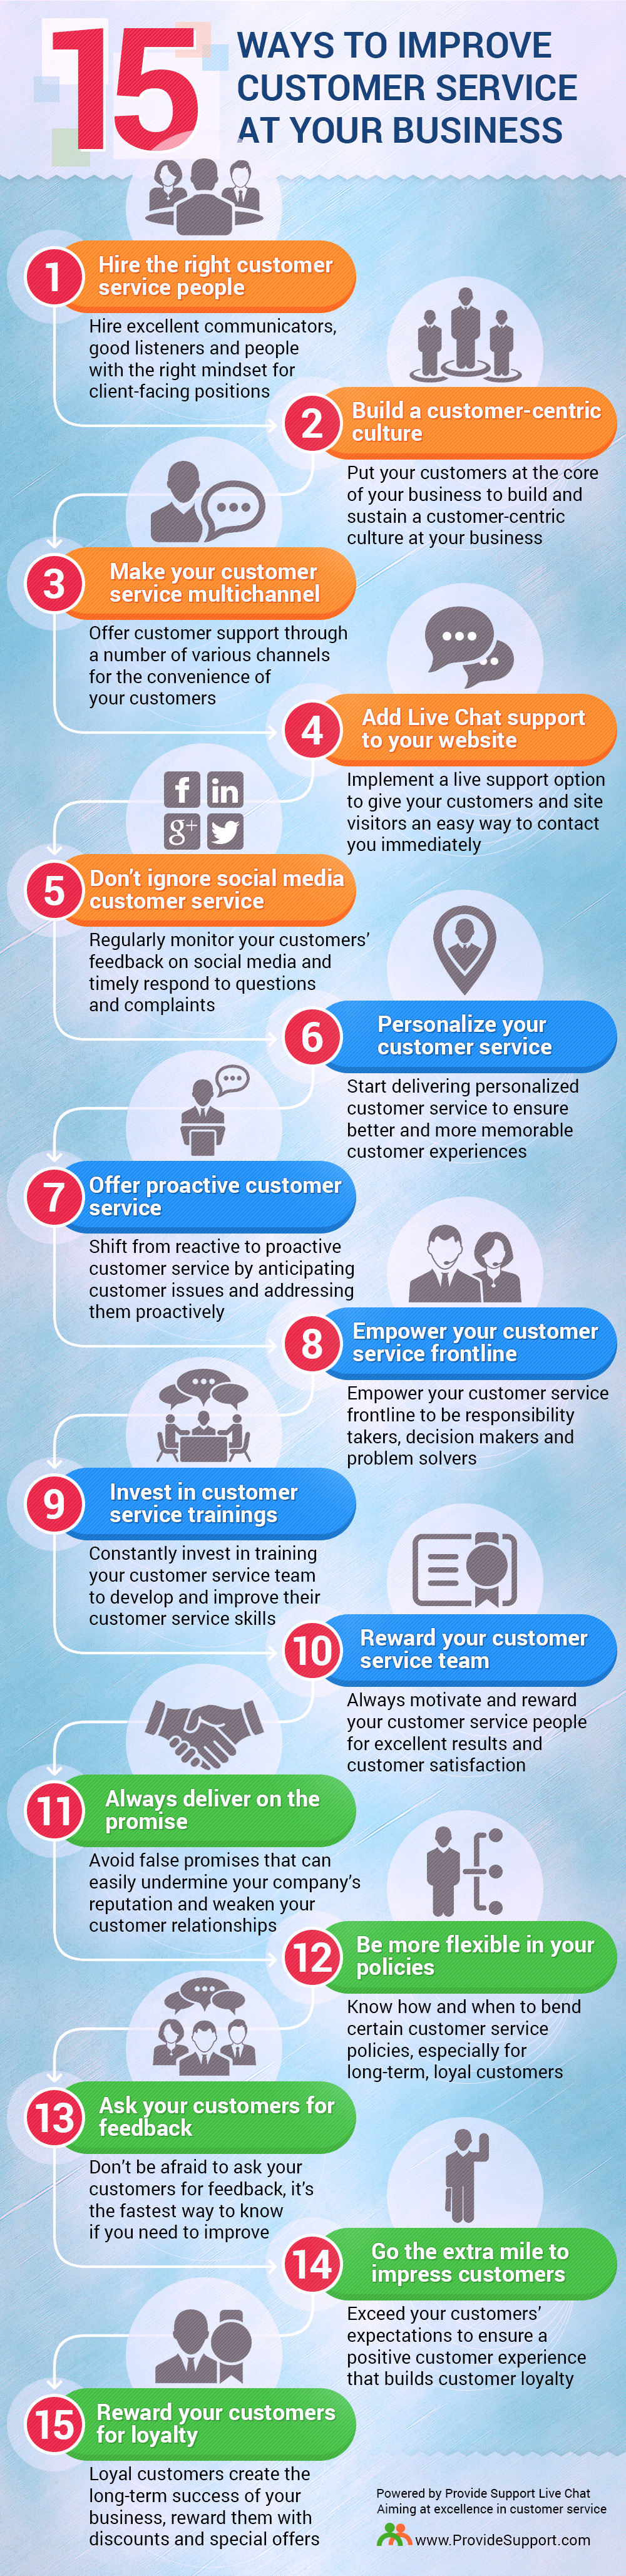 15 Ways to Improve Customer Service at Your Business [Inforgraphic from Provide Support]